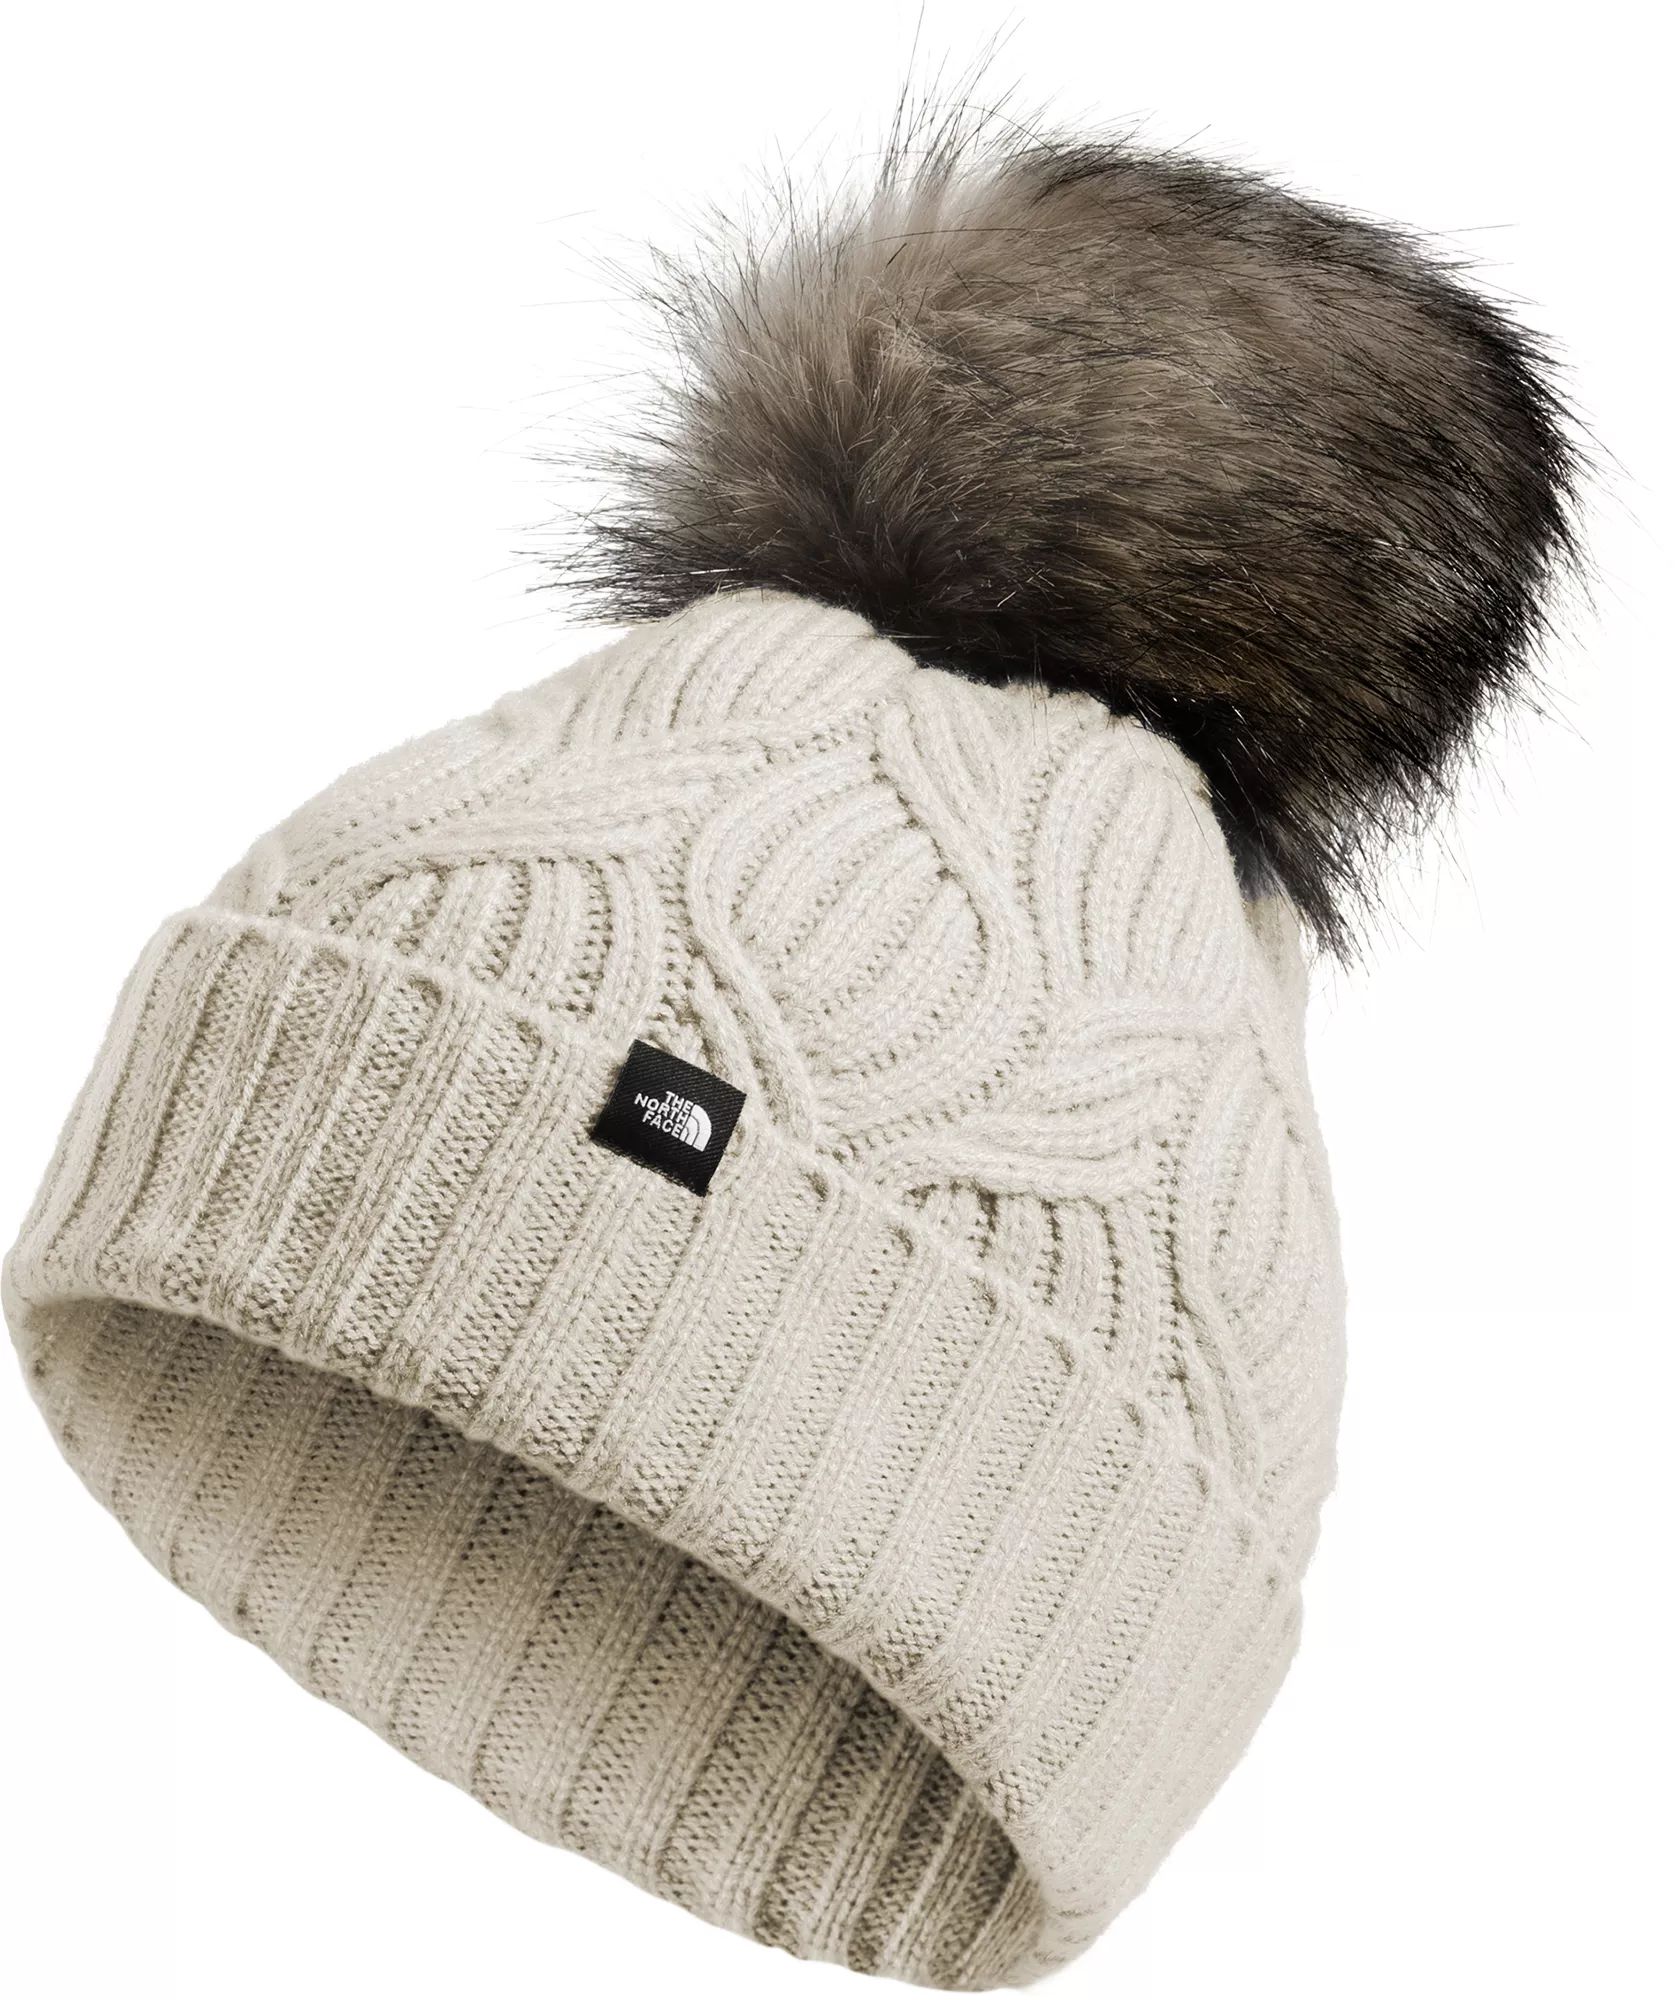 Women's The North Face Oh-Mega Fur Pom Beanie, Size: One size, Vintage White | Dick's Sporting Goods